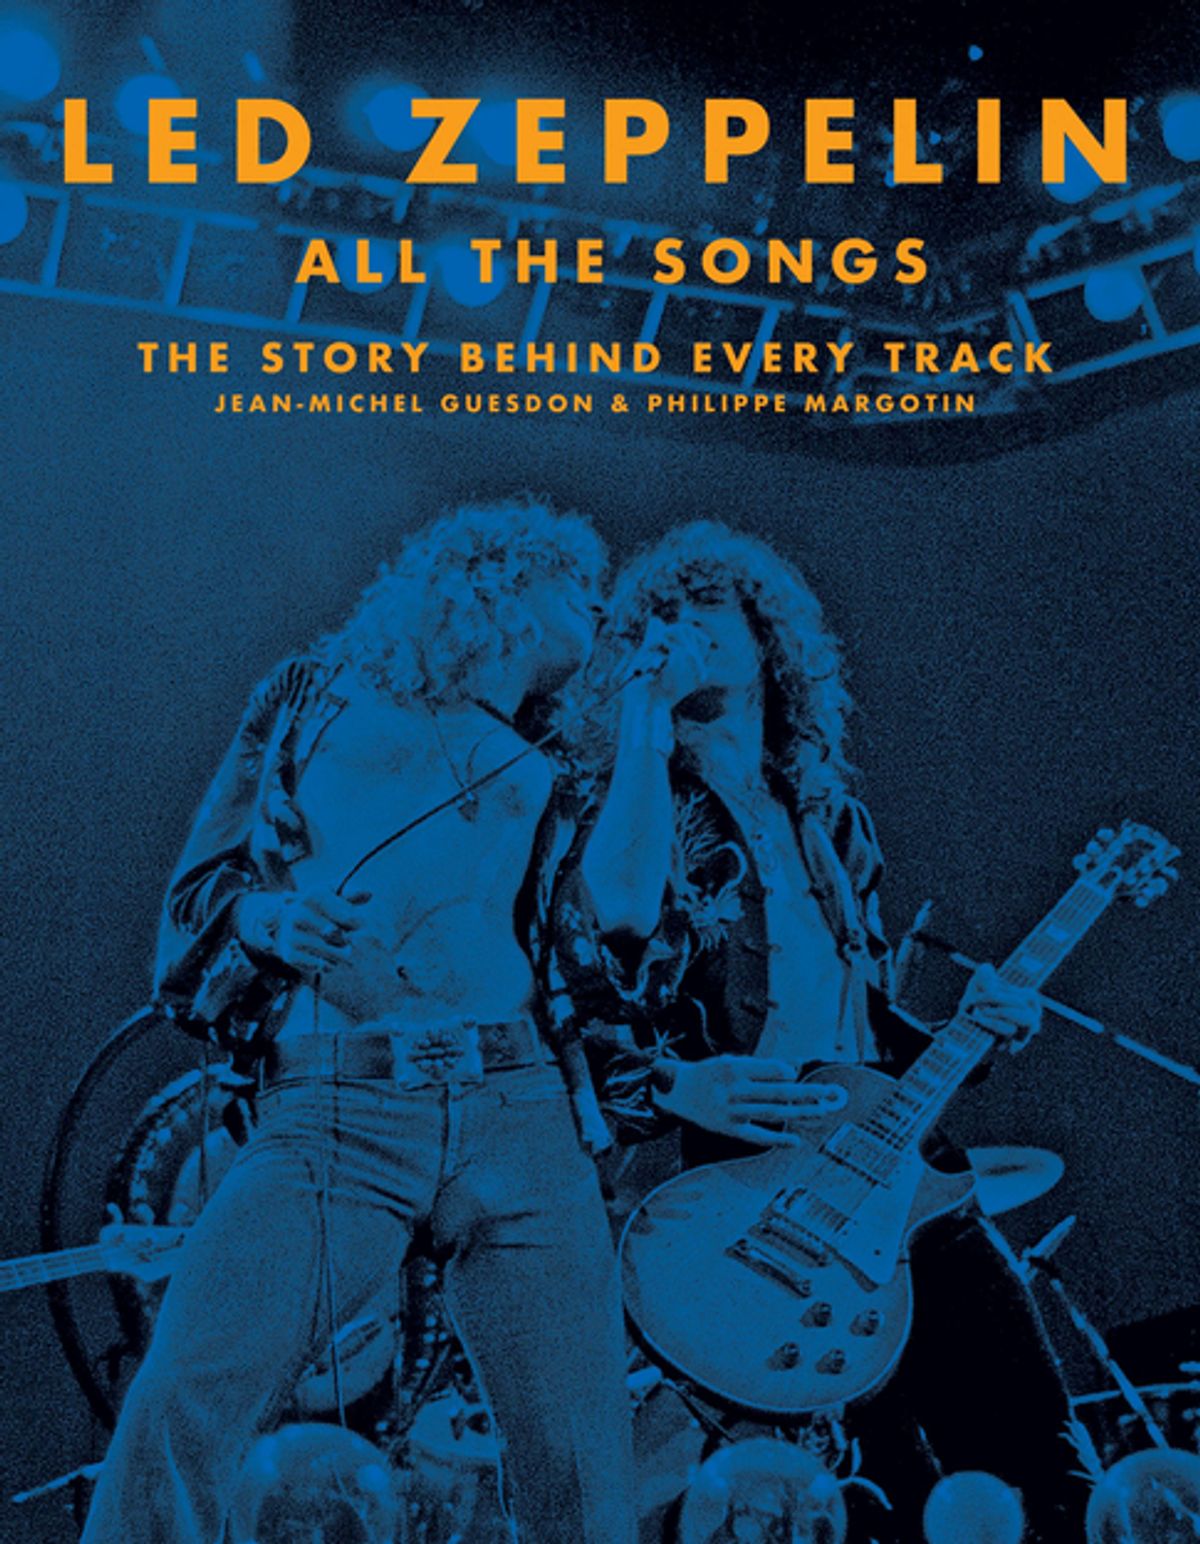 Led Zeppelin All the Songs | Jean-Michel Guesdon, Philippe Margotin